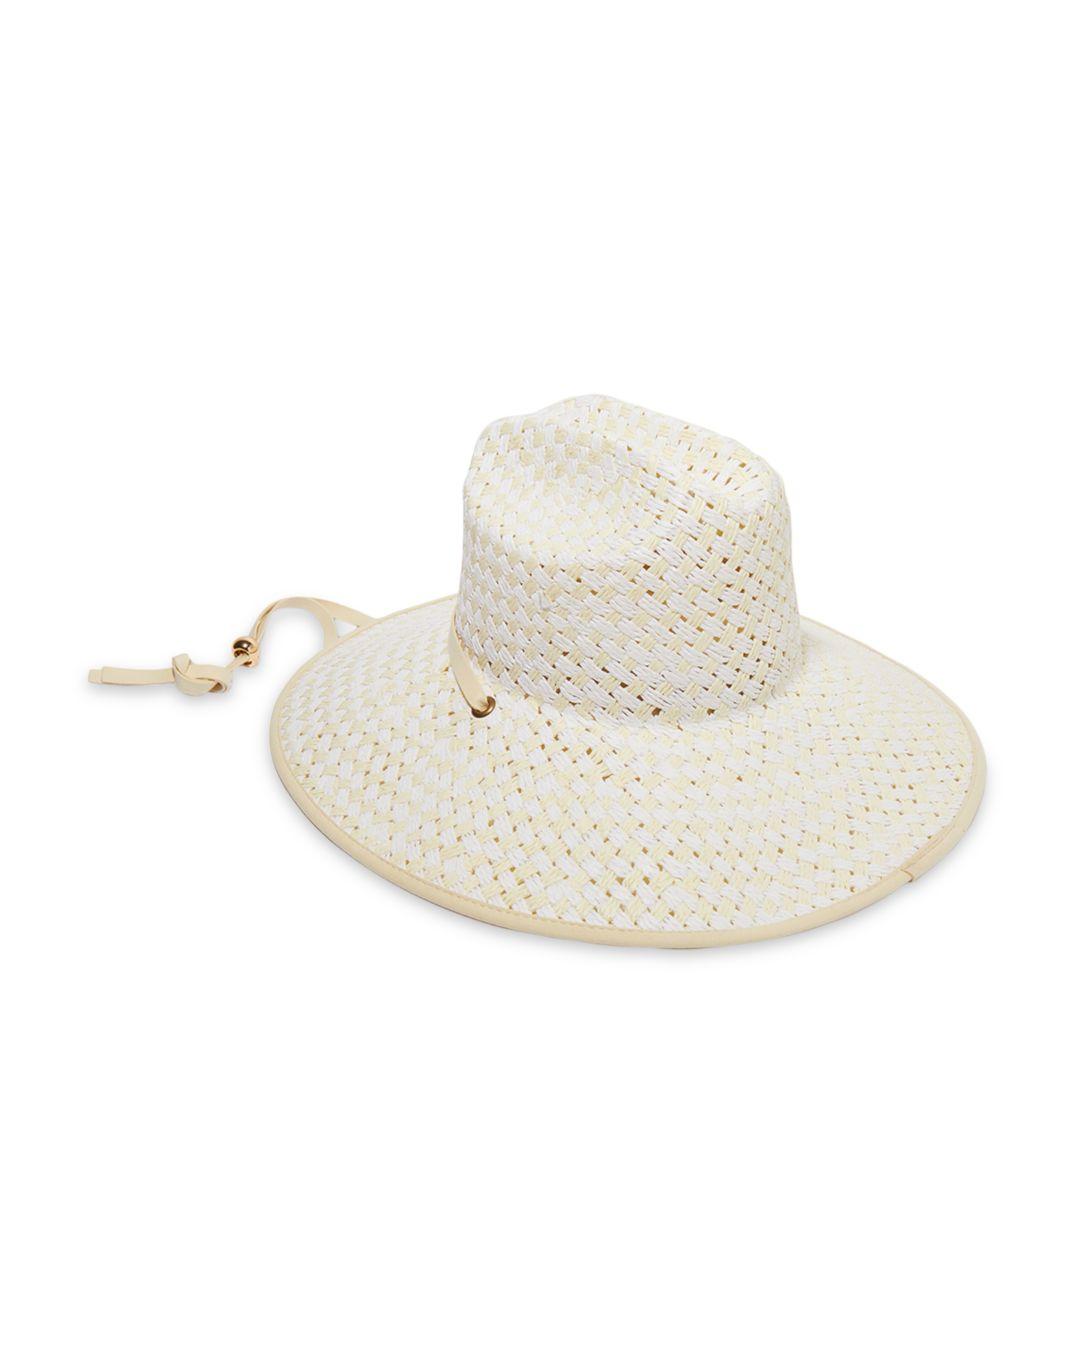 Lele Sadoughi Checkered Straw Hat in White | Lyst